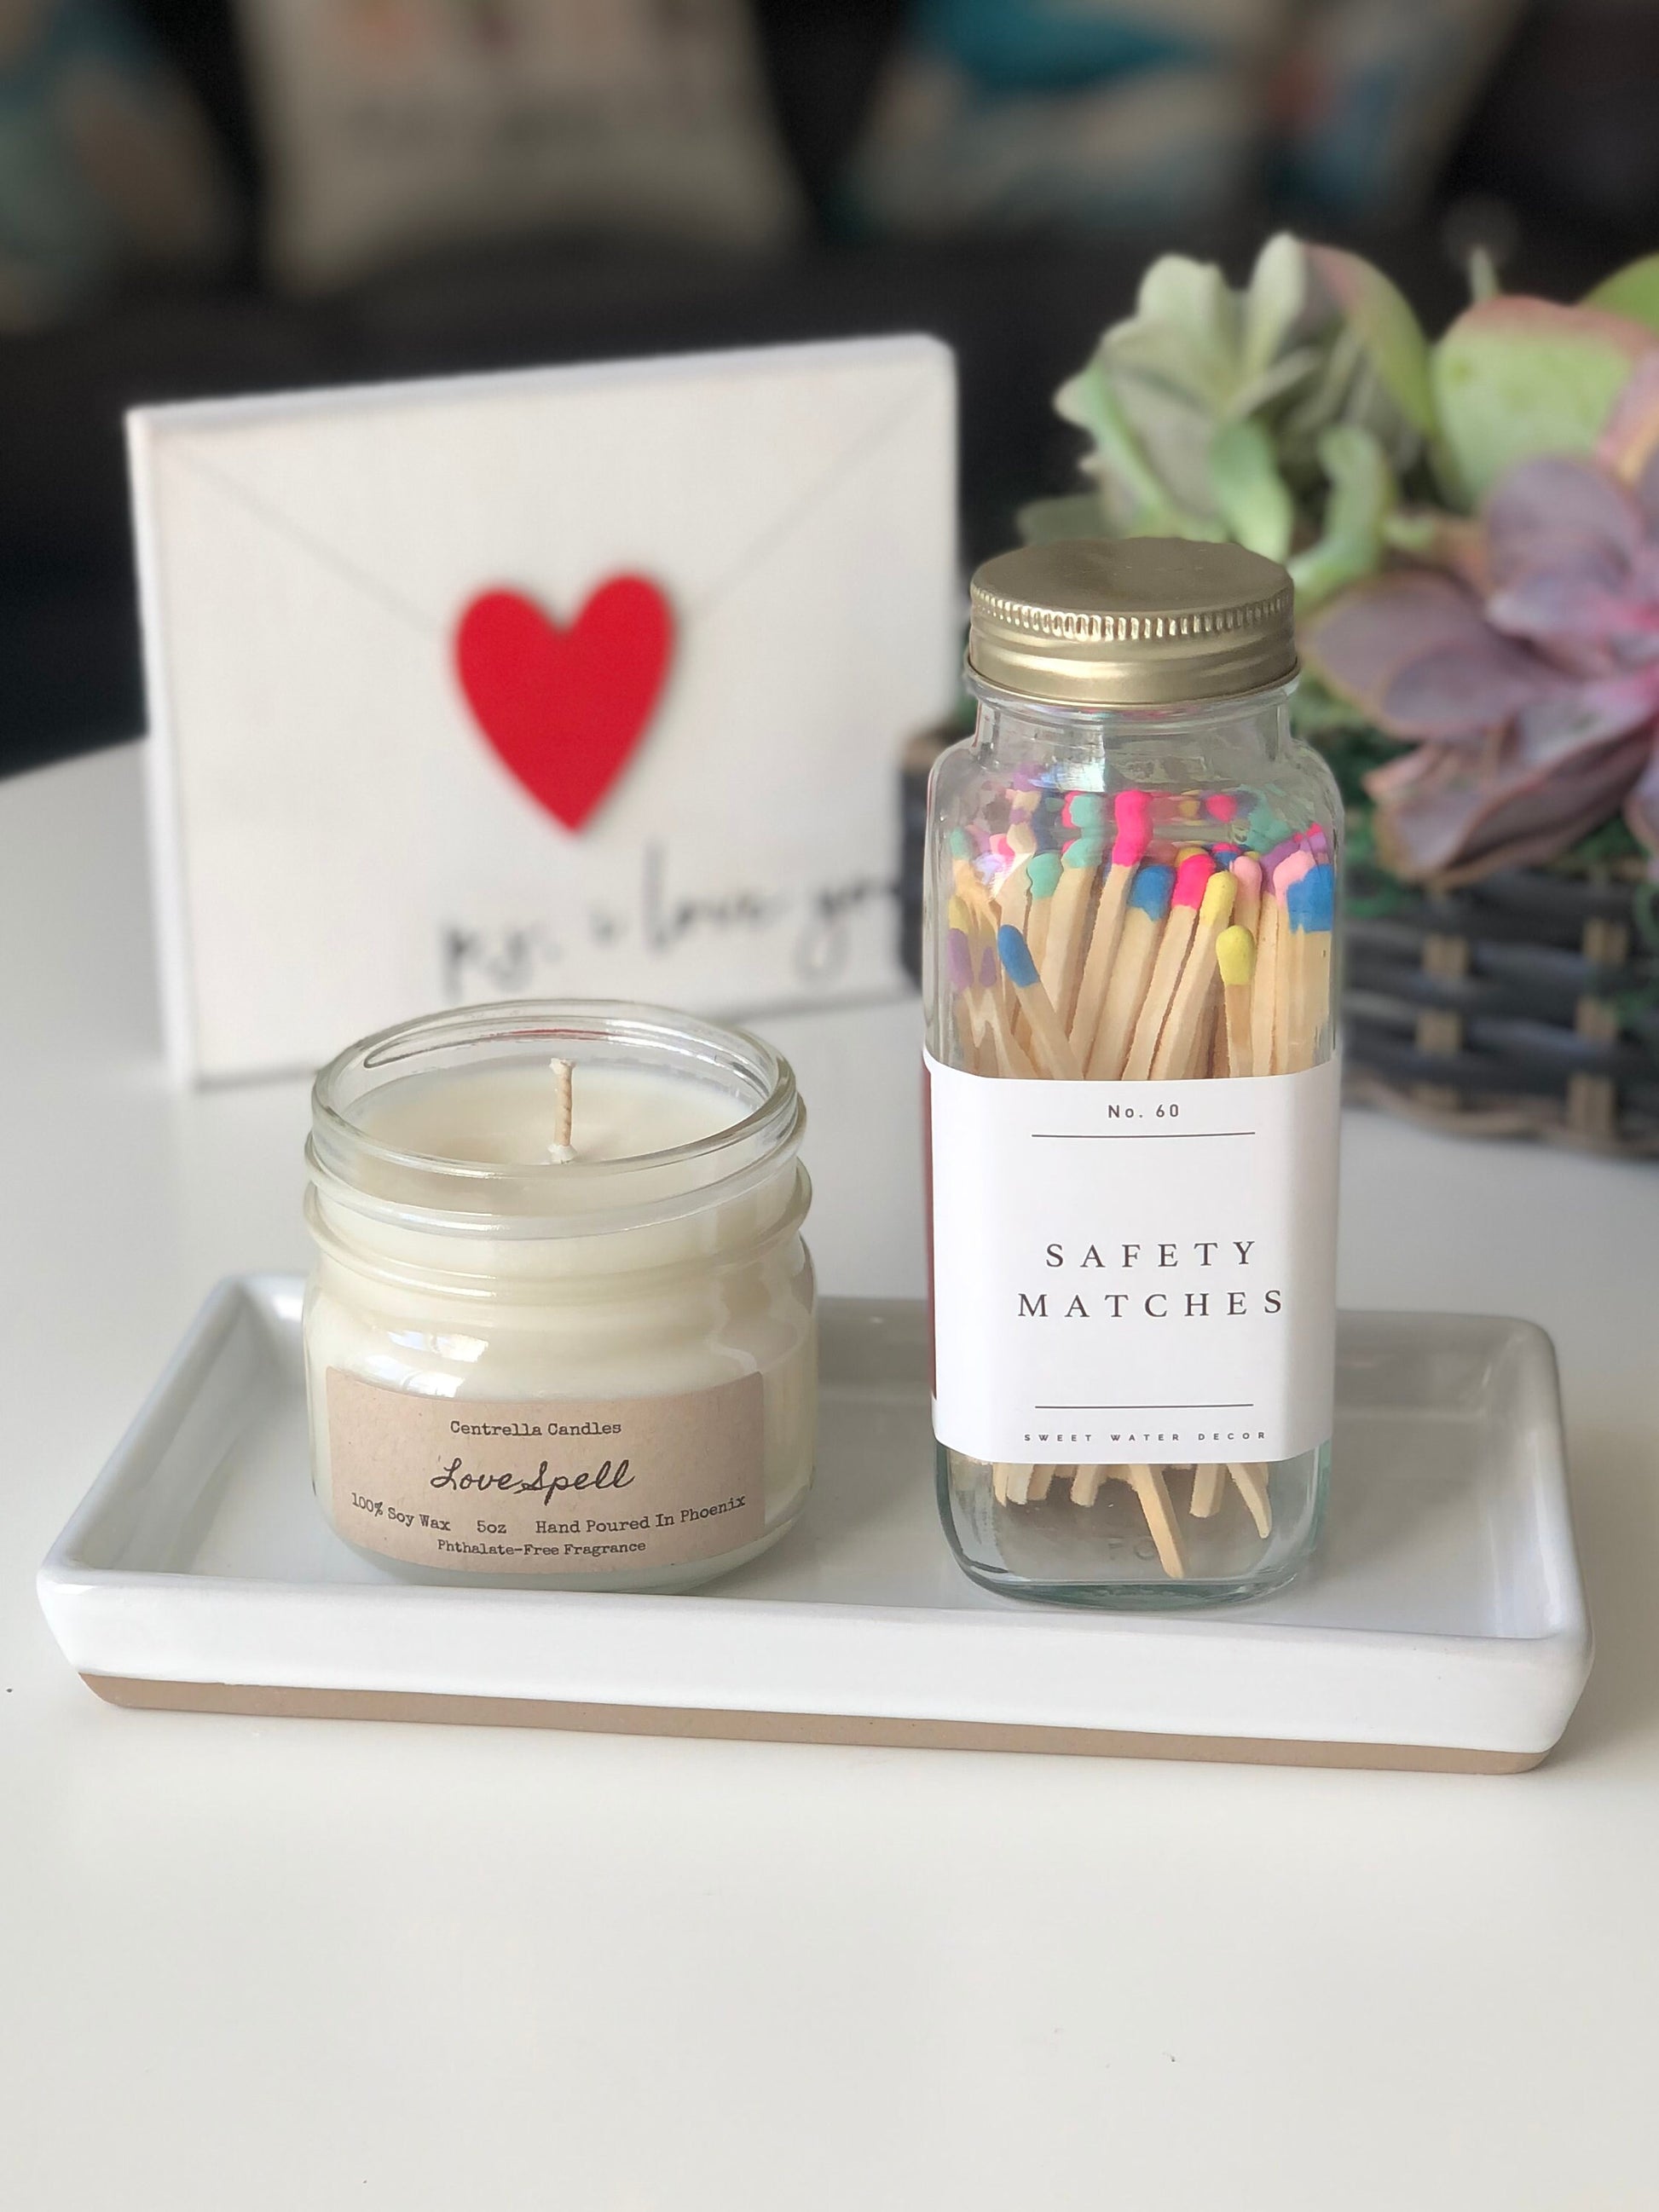 5oz candle, candle tray, and luxury matches.